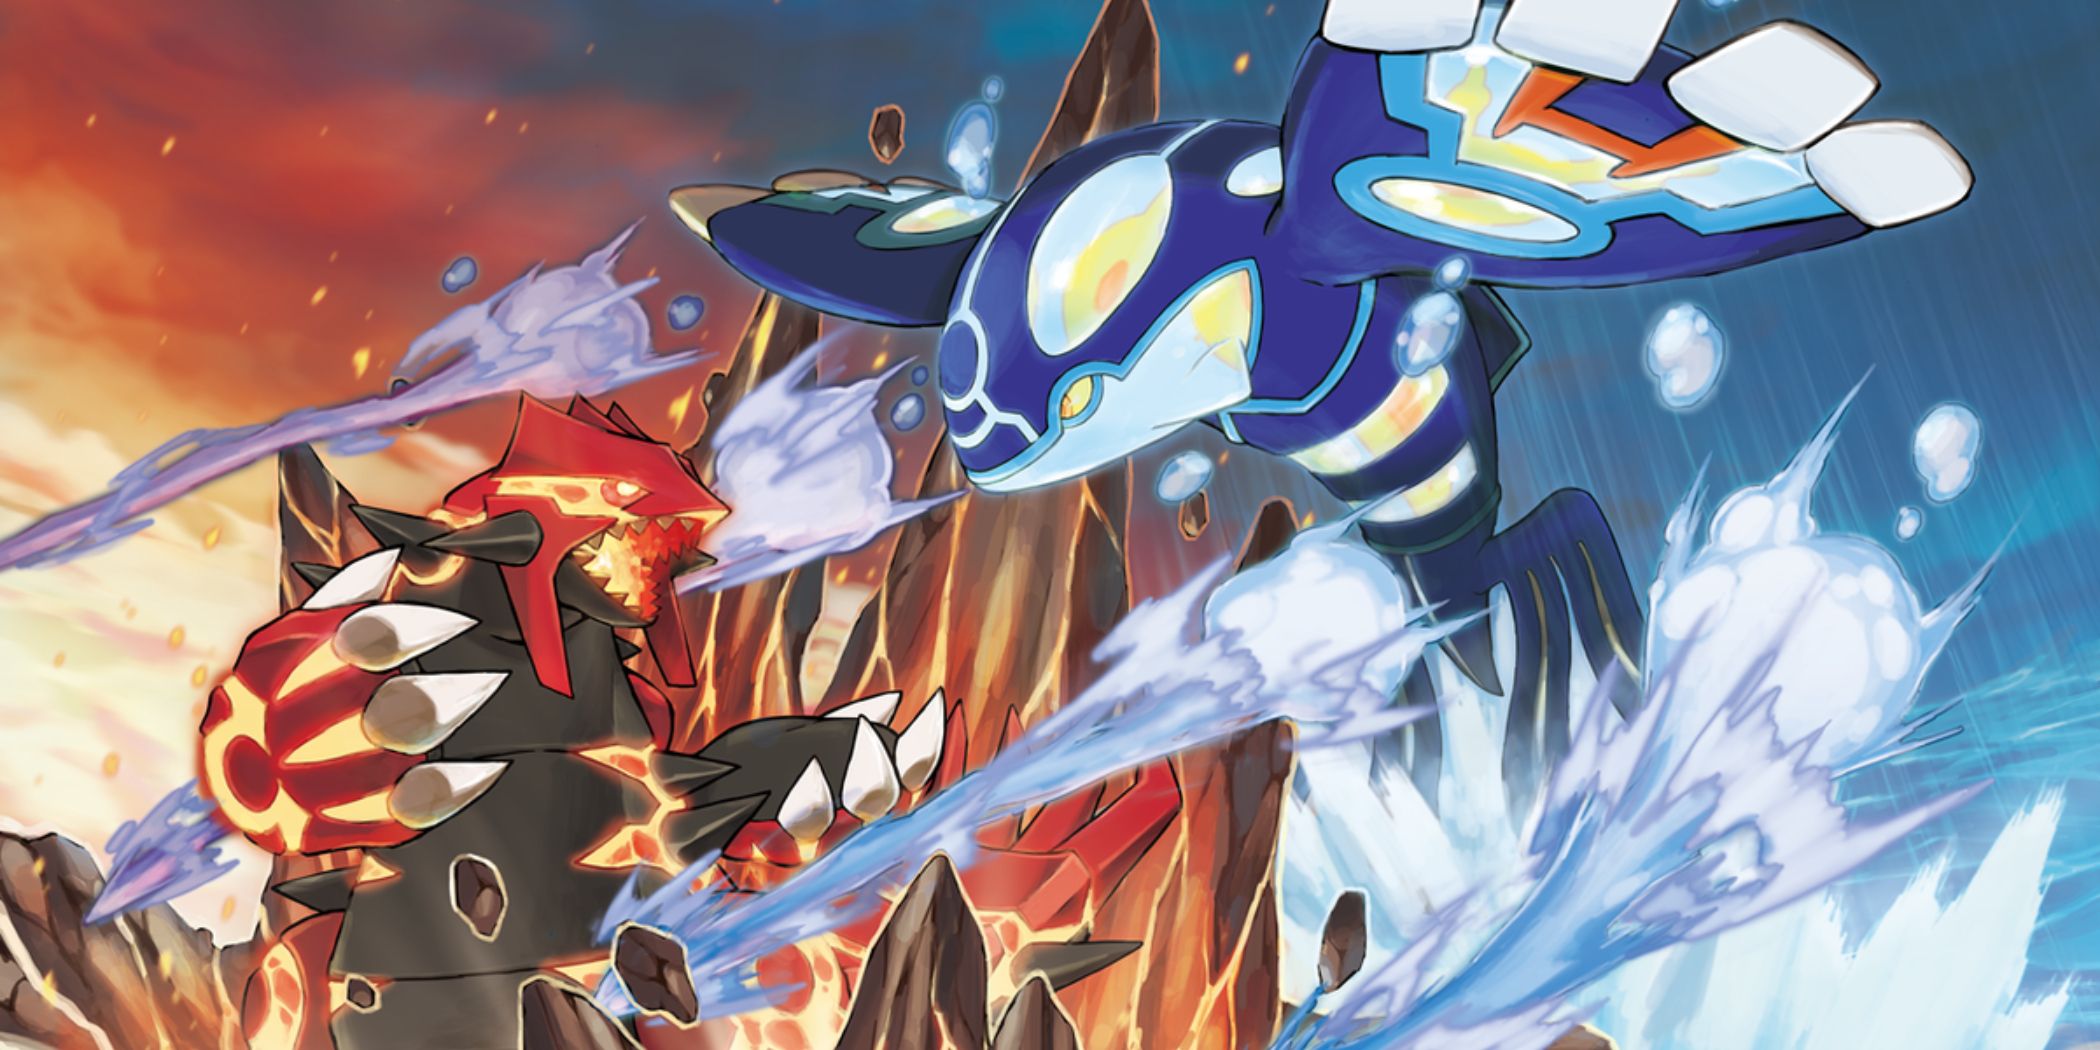 Kyogre fires an Original Pulse at Groudon, who counters with Precipice Blades.